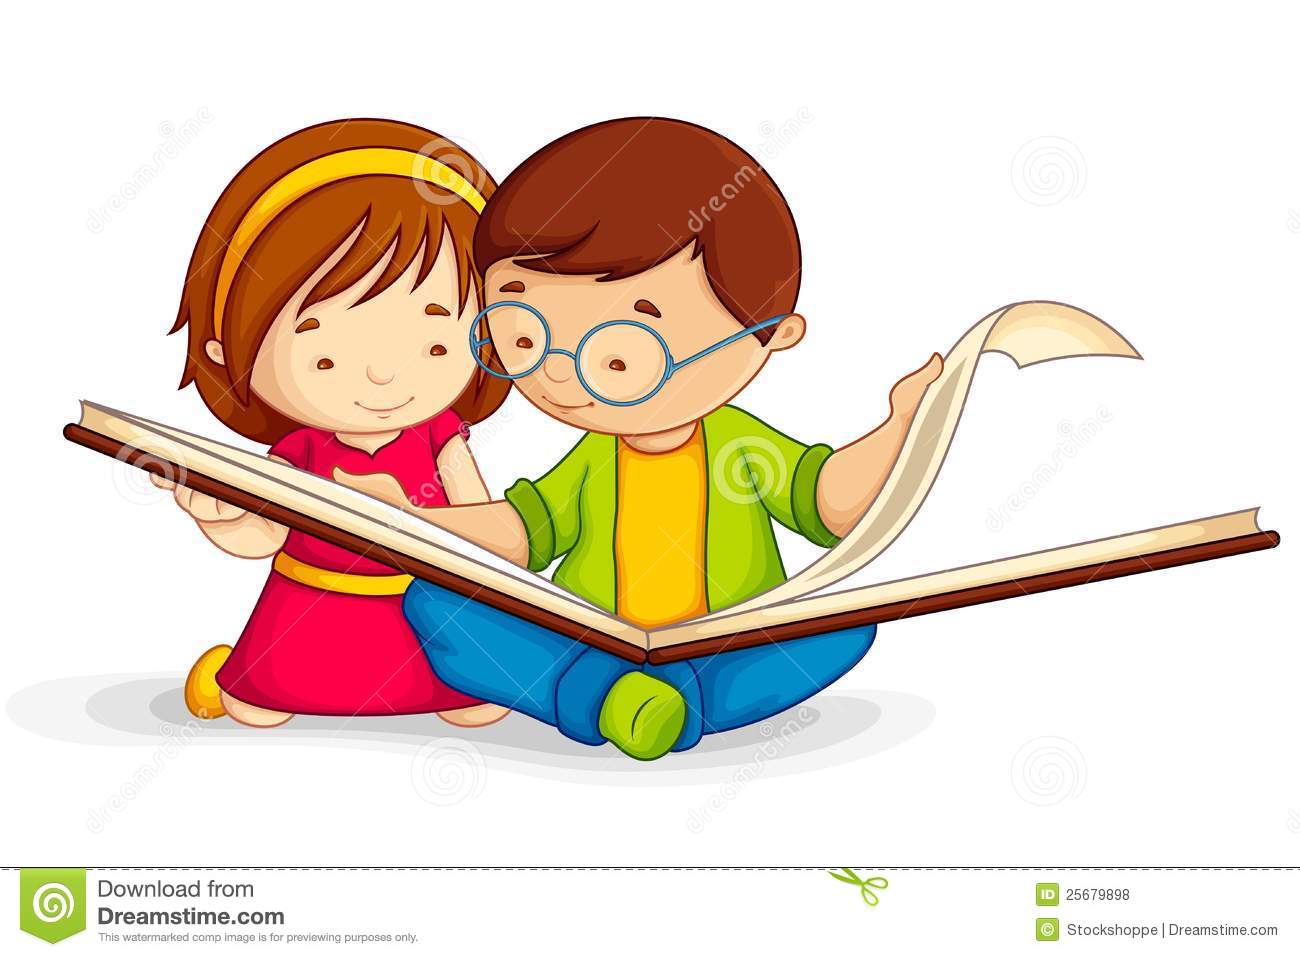 Kid Reading Open Book Royalty Free Stock Photos   Image  25679898